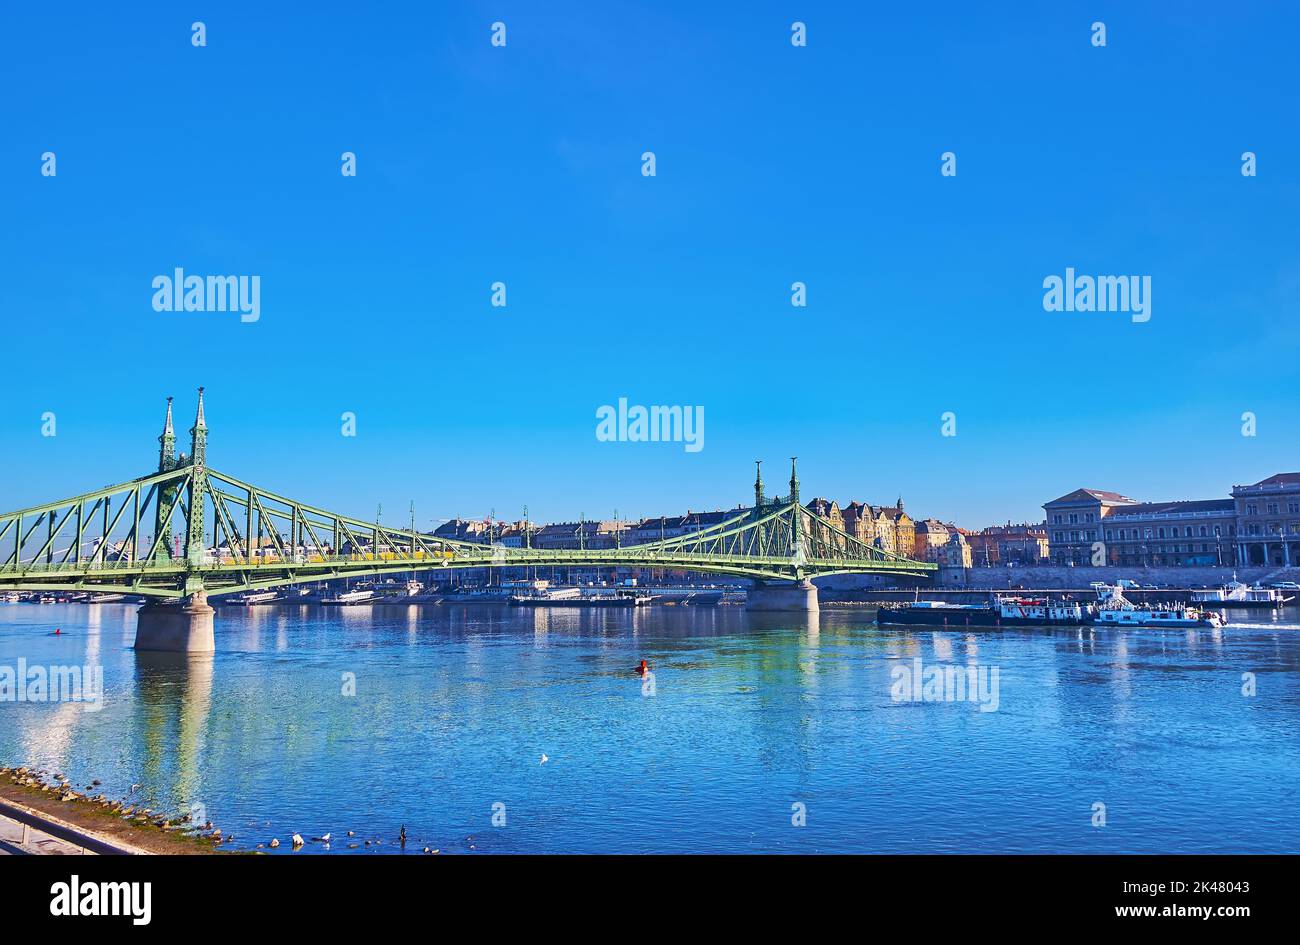 Historic green Art Nouveau Liberty Bridge across Danube River with a view on the Corvin University on the opposite bank, Budapest, Hungary Stock Photo